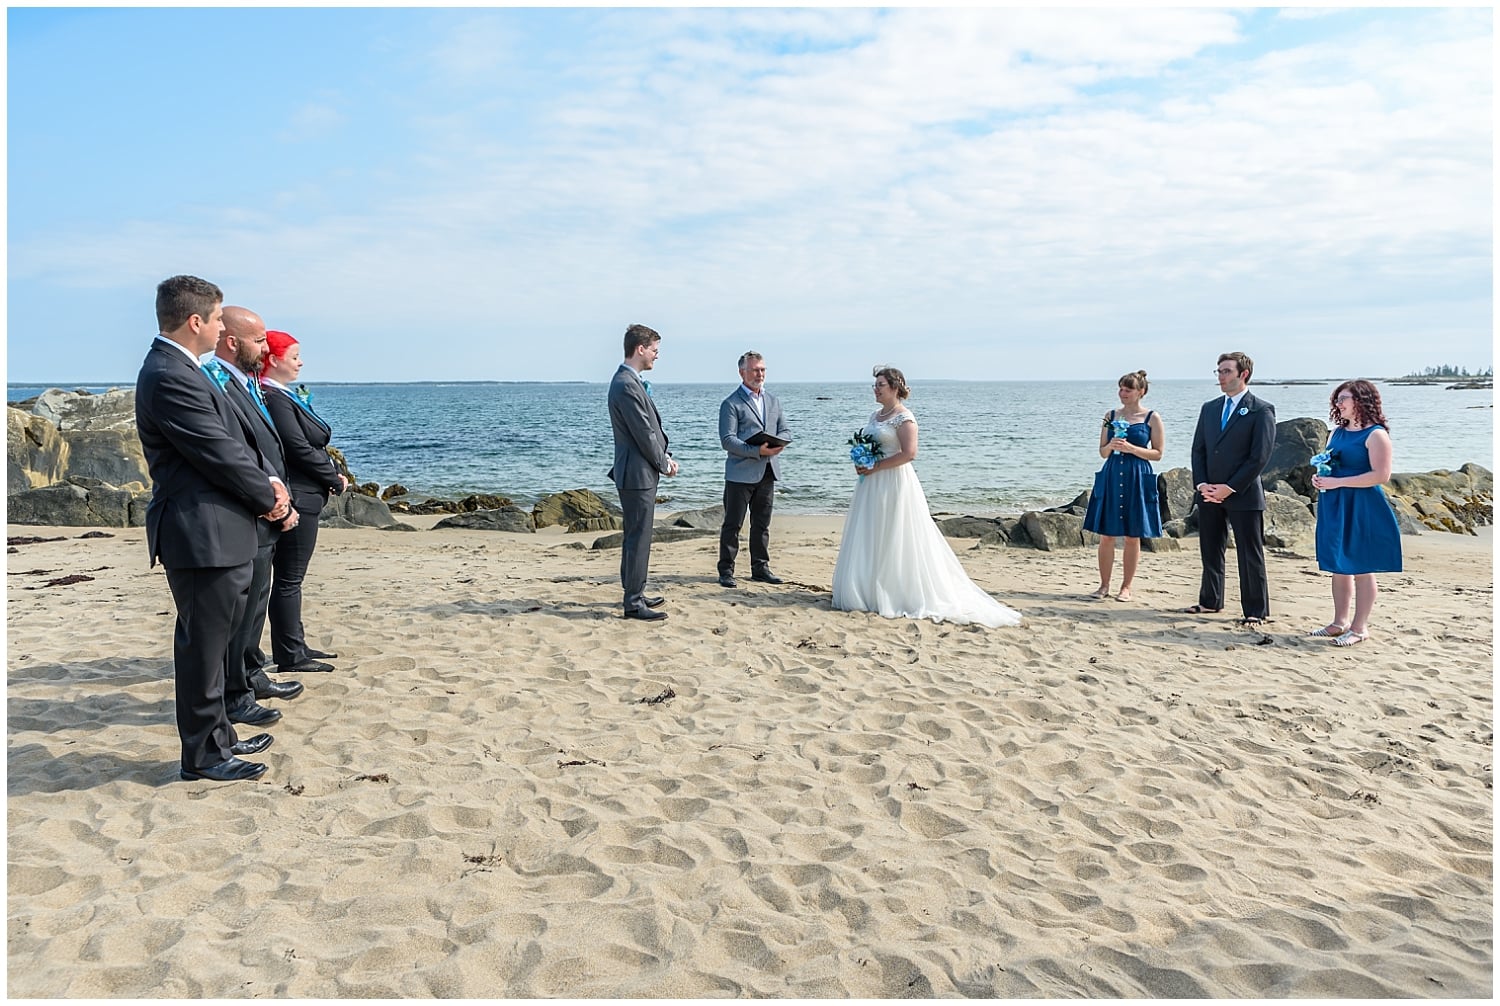 A beach wedding ceremony on the ocean in Green Bay NS.